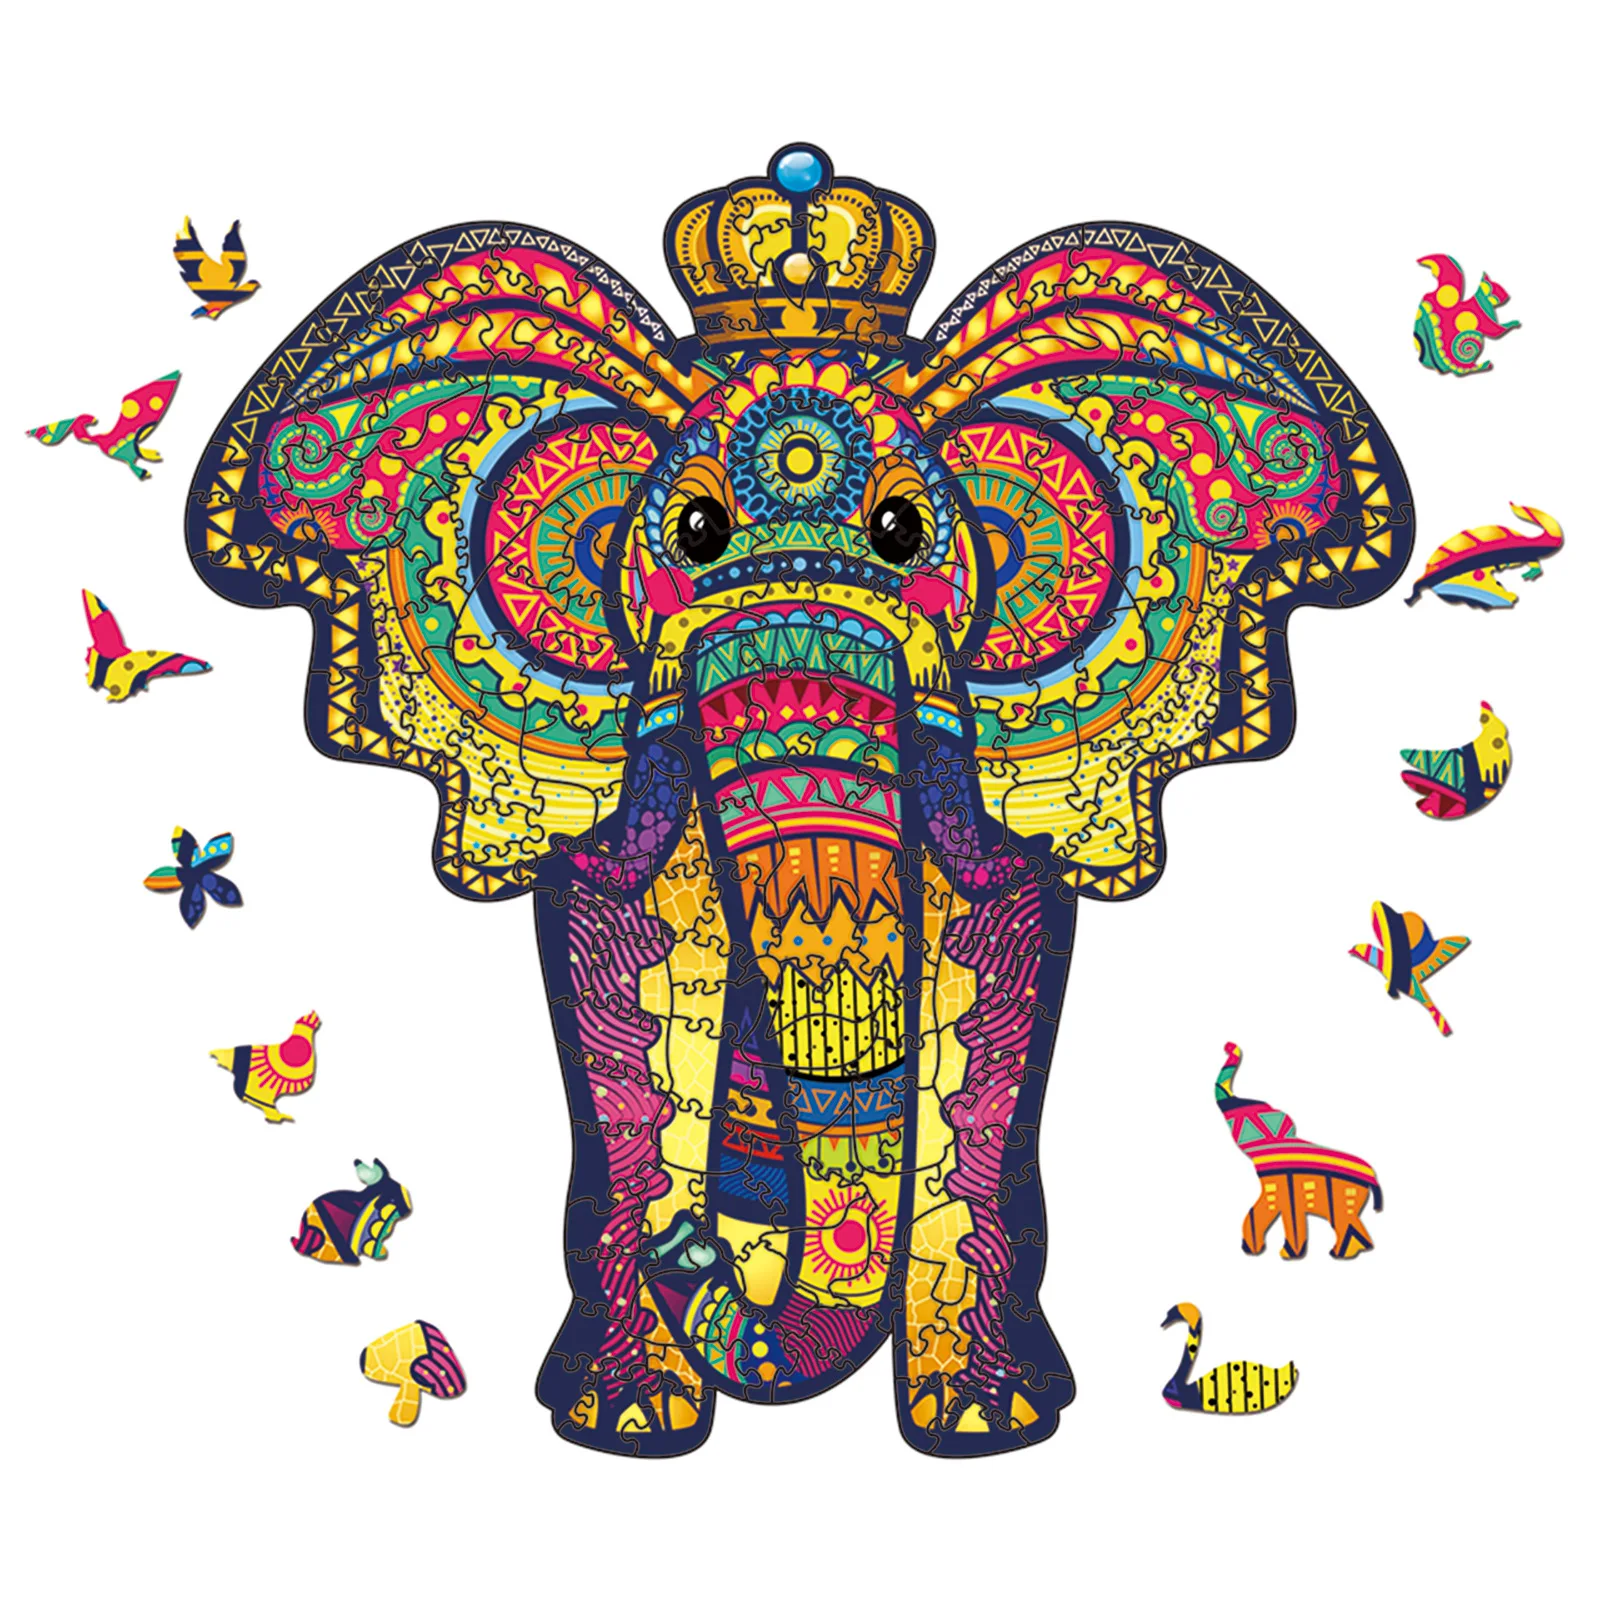 

New Colorful Crown Elephant Wooden Puzzle 3D DIY A3 A4 A5 Fidget Toy Alien Animal Jigsaw Game 100 200 300 Pieces For Kids Child